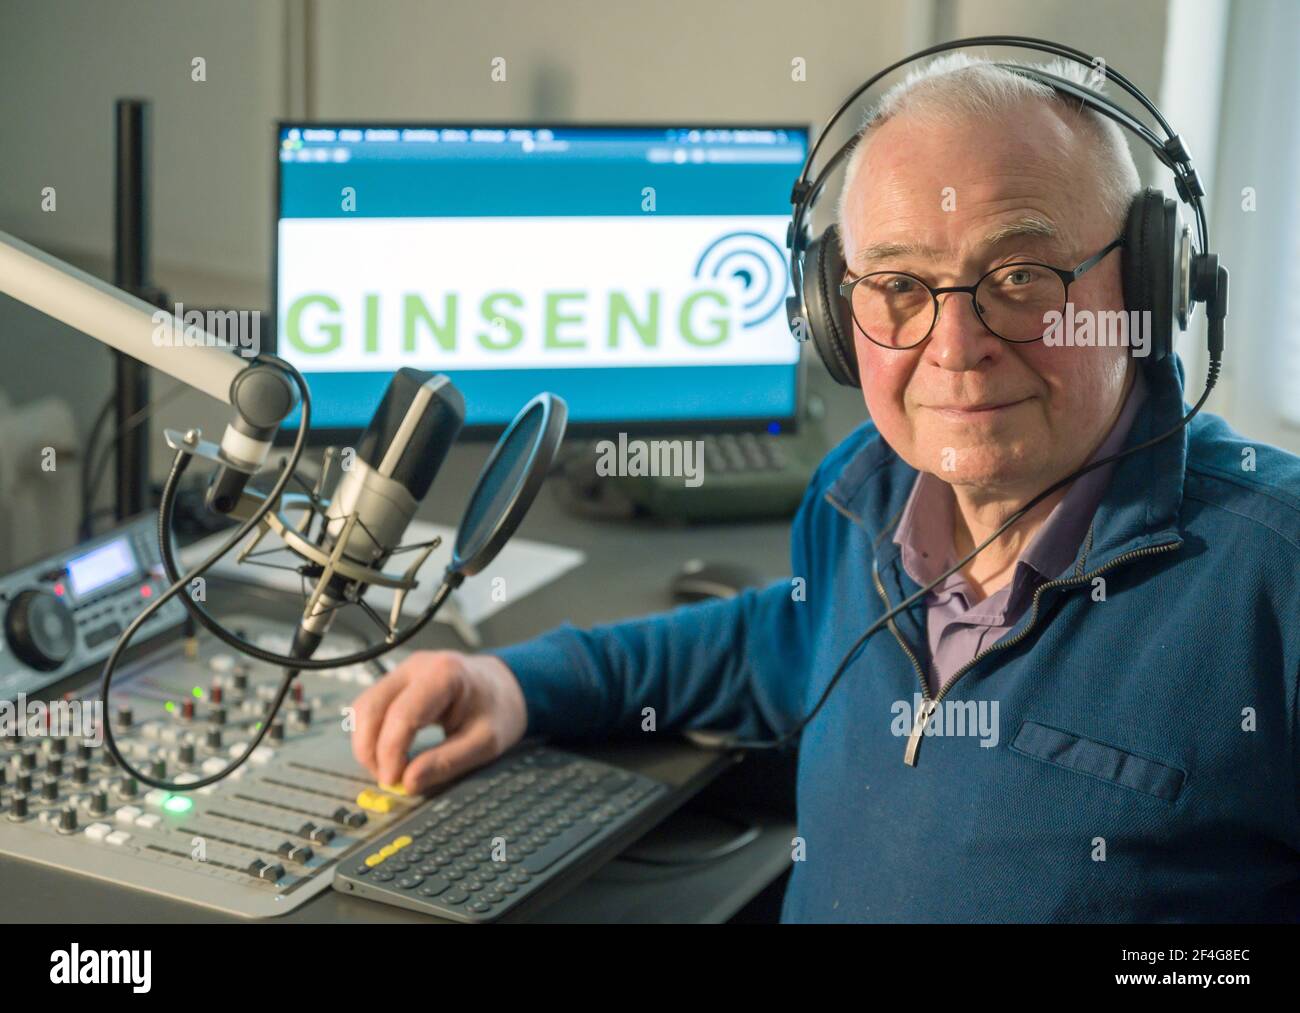 17 March 2021, Brandenburg, Grünheide: Ulrich Burow, chairman of the Radio  Ginseng e.V. association, sits in the broadcasting studio. Senior citizens  are now making radio in Grünheide. At the end of March,